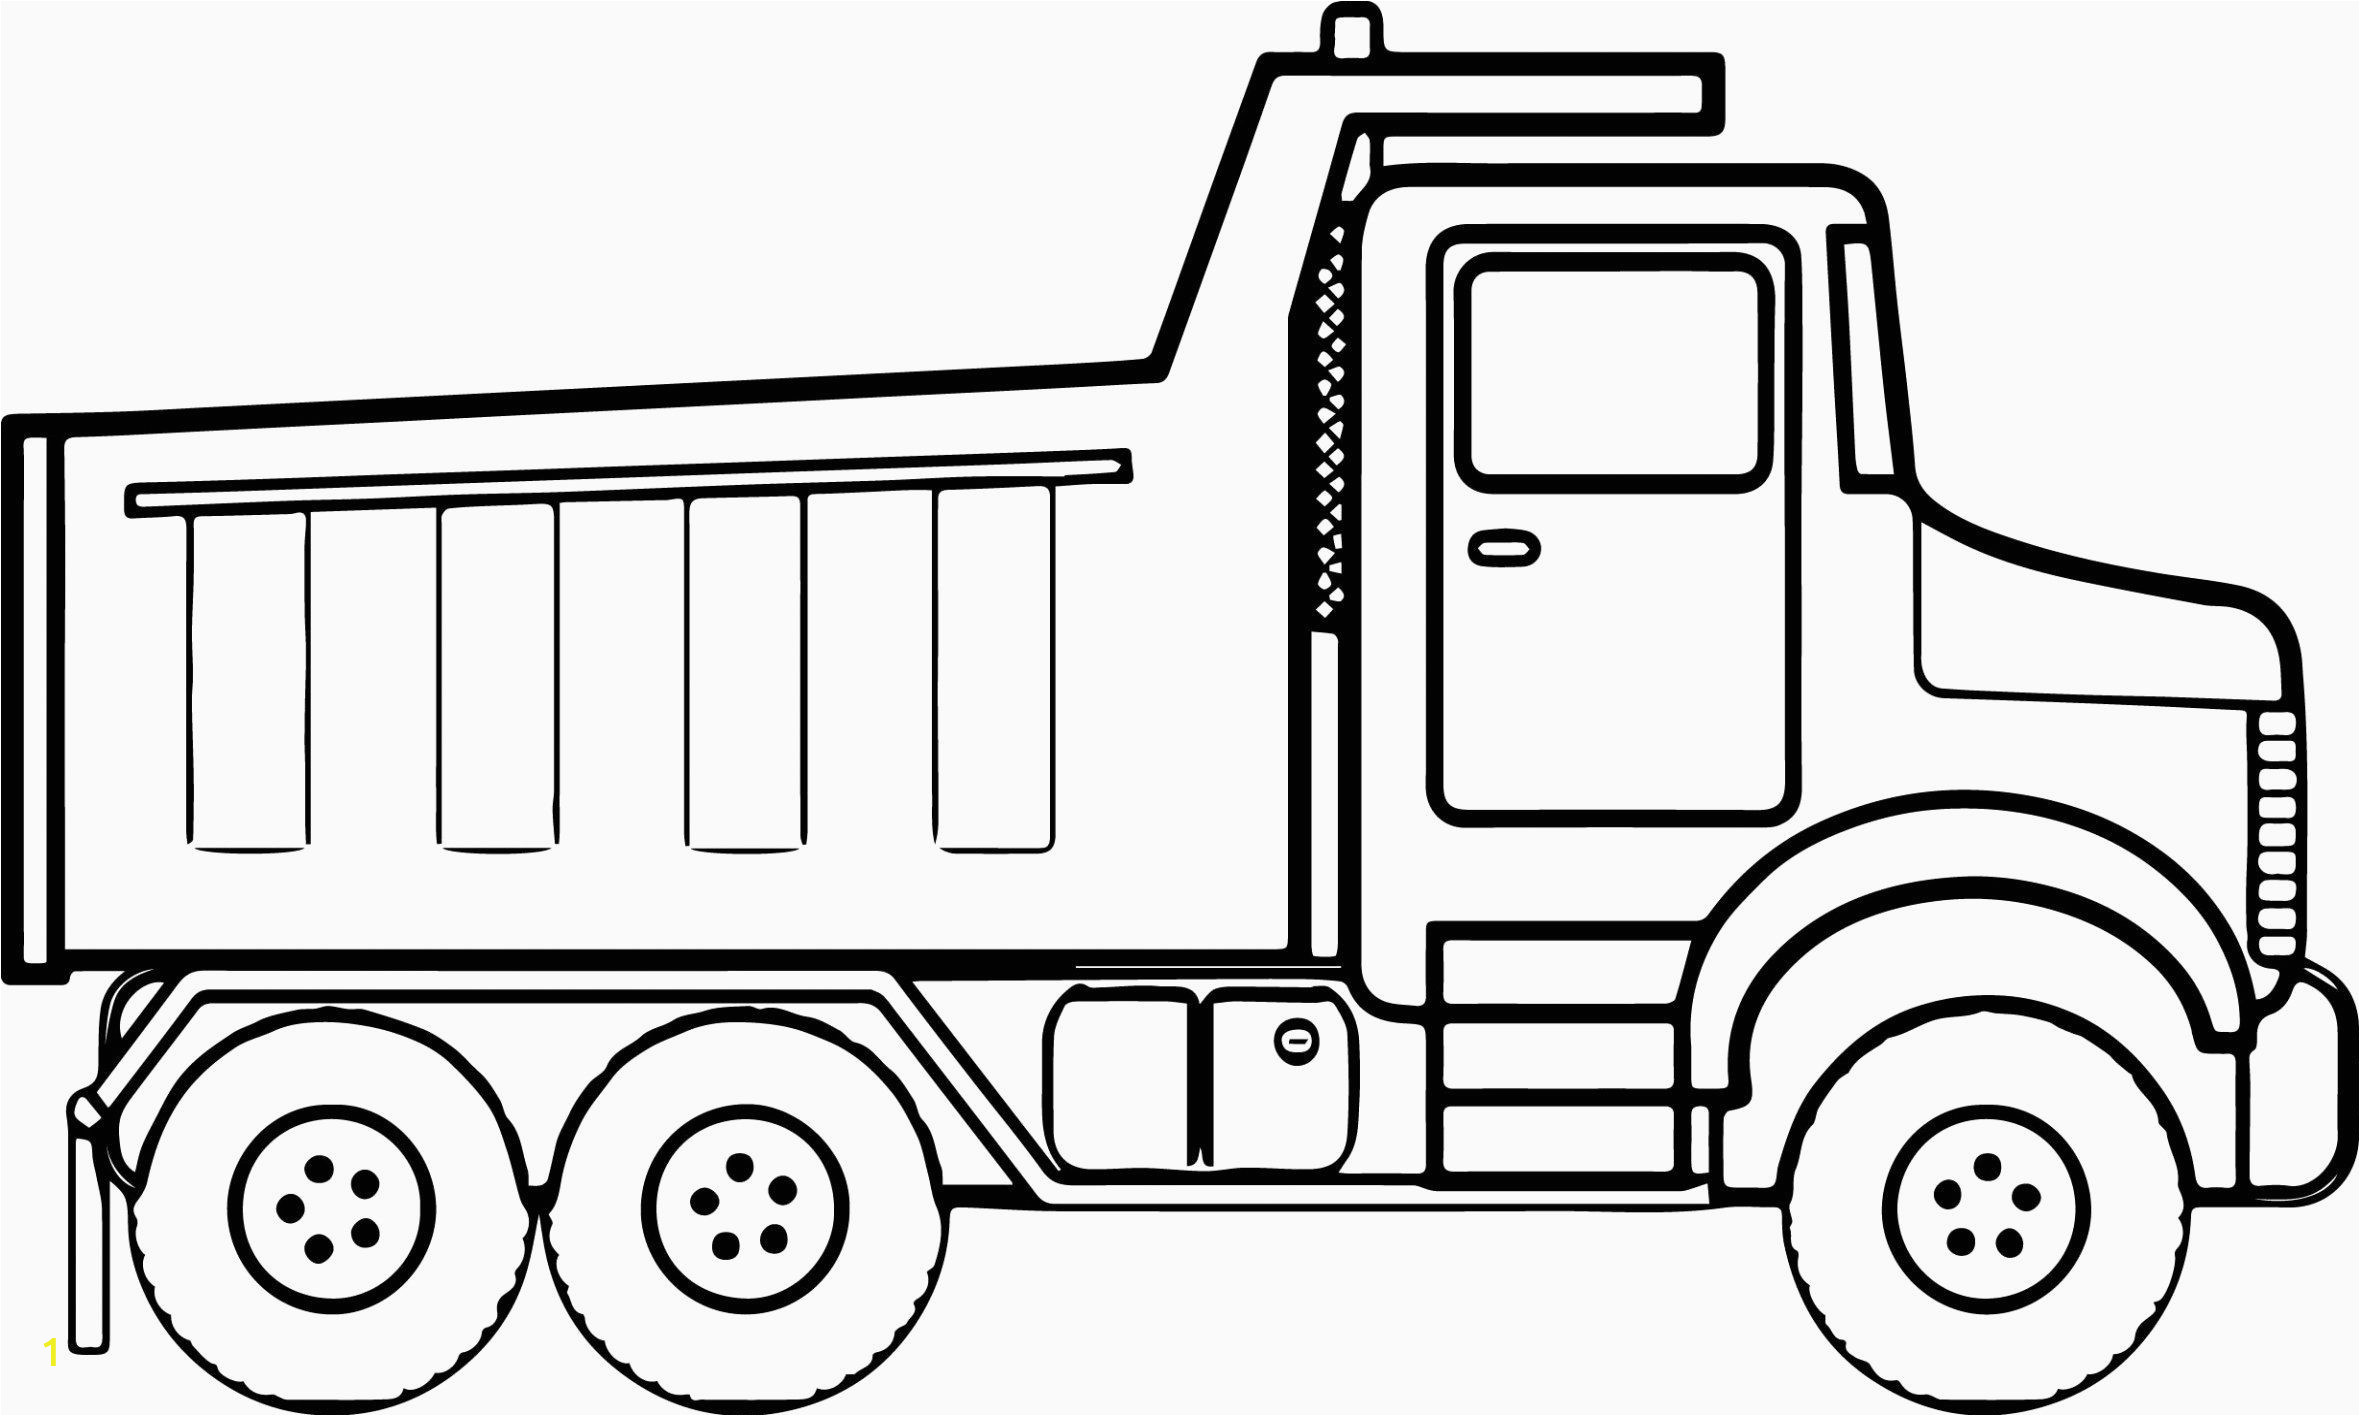 Big Truck Coloring Pages Transportation Coloring Pages for Preschoolers Luxury New